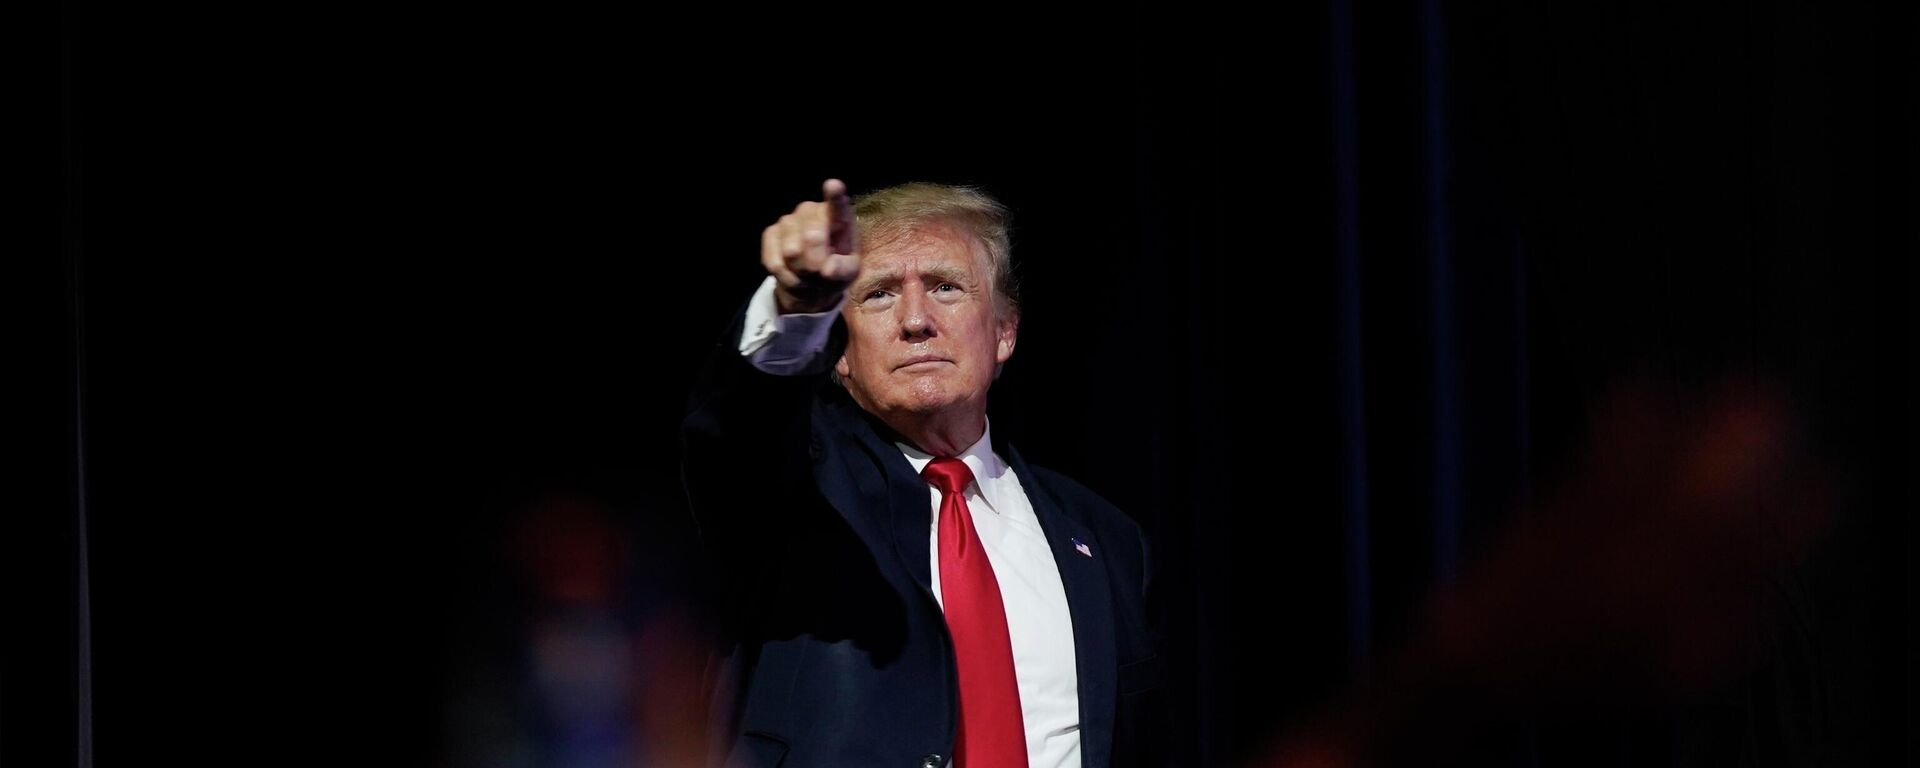 FILE - In this July 24, 2021, file photo, former President Donald Trump points to supporters after speaking at a Turning Point Action gathering, in Phoenix - Sputnik International, 1920, 19.12.2021